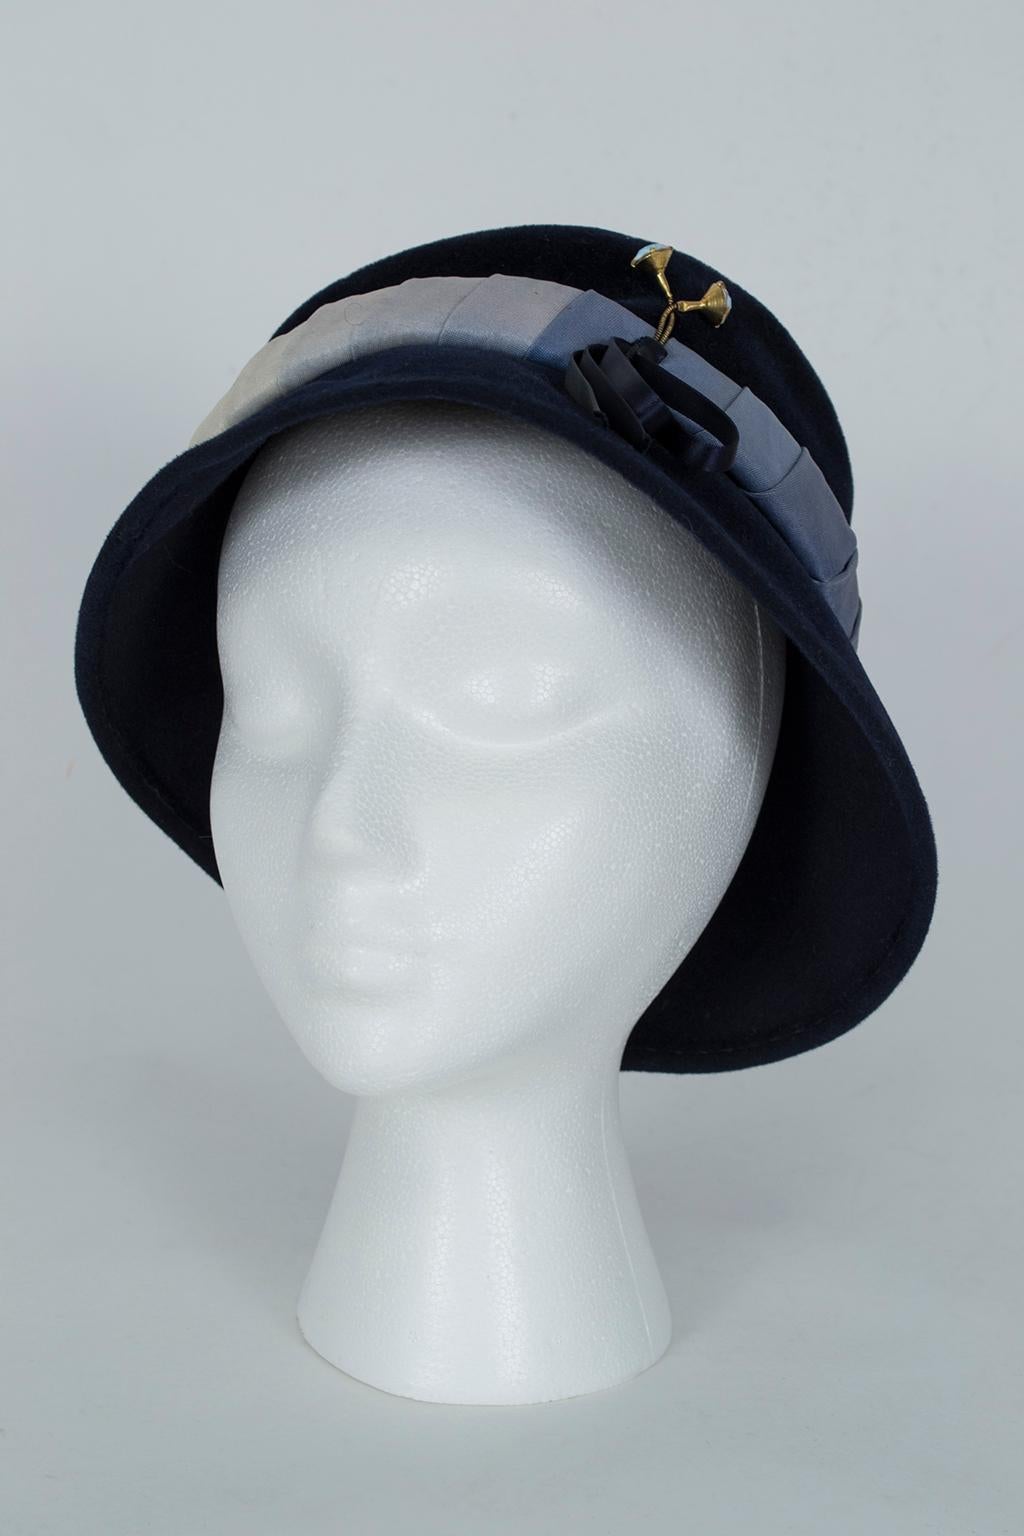 Made by one of the finest French milliners of the mid-20th century, this immaculate bucket hat offers all the style of a cloche, the warmth of a brim and the insouciance of a floppy together with an up-to-the-minute ombré band. Ideal for fall and